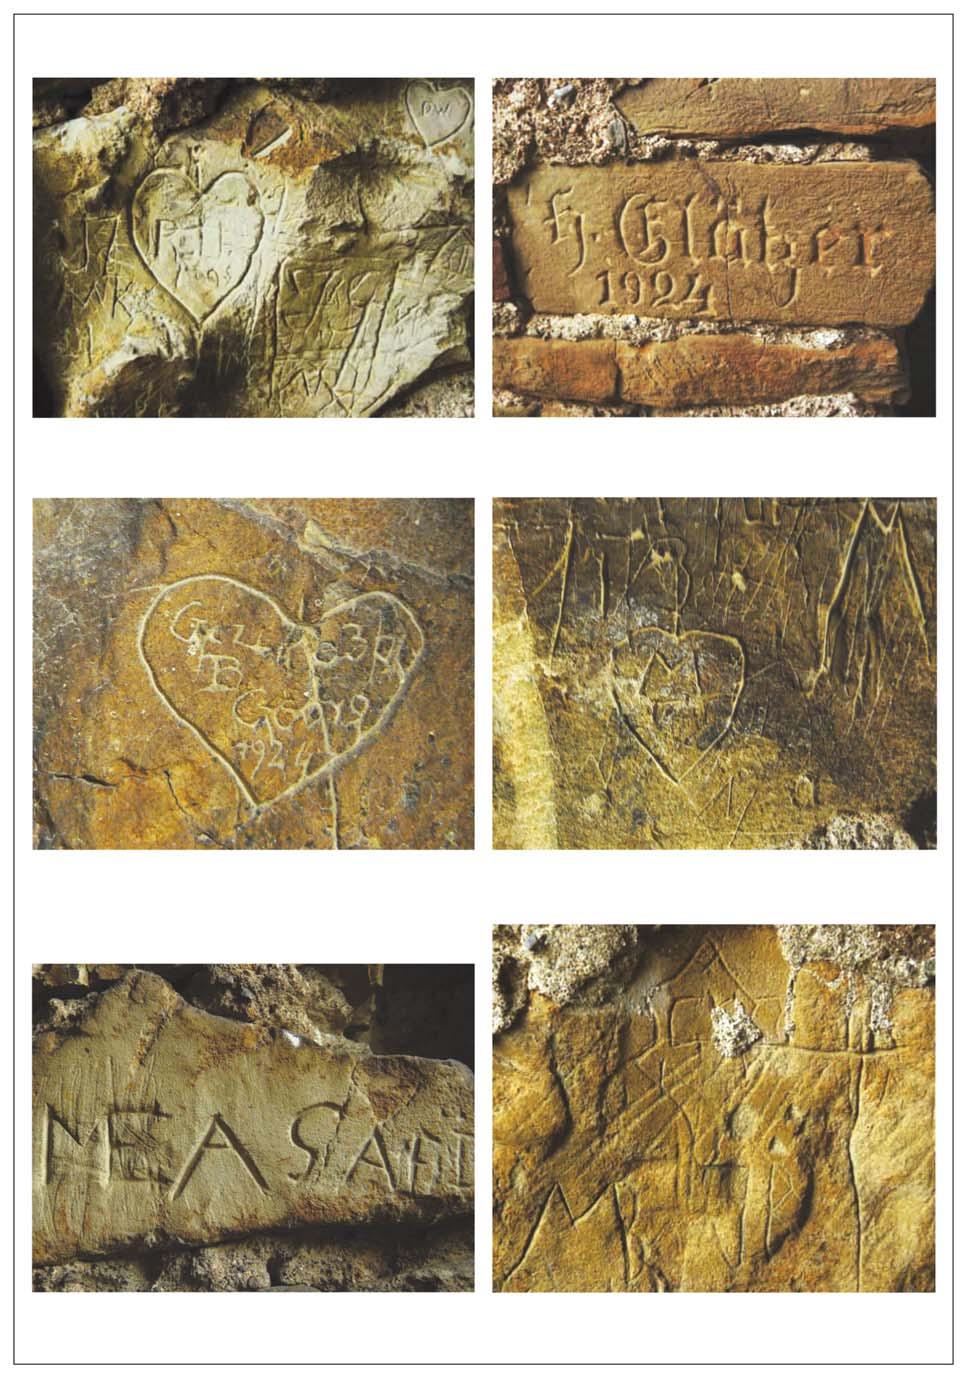 Graffiti Discovered in the Western Tower of